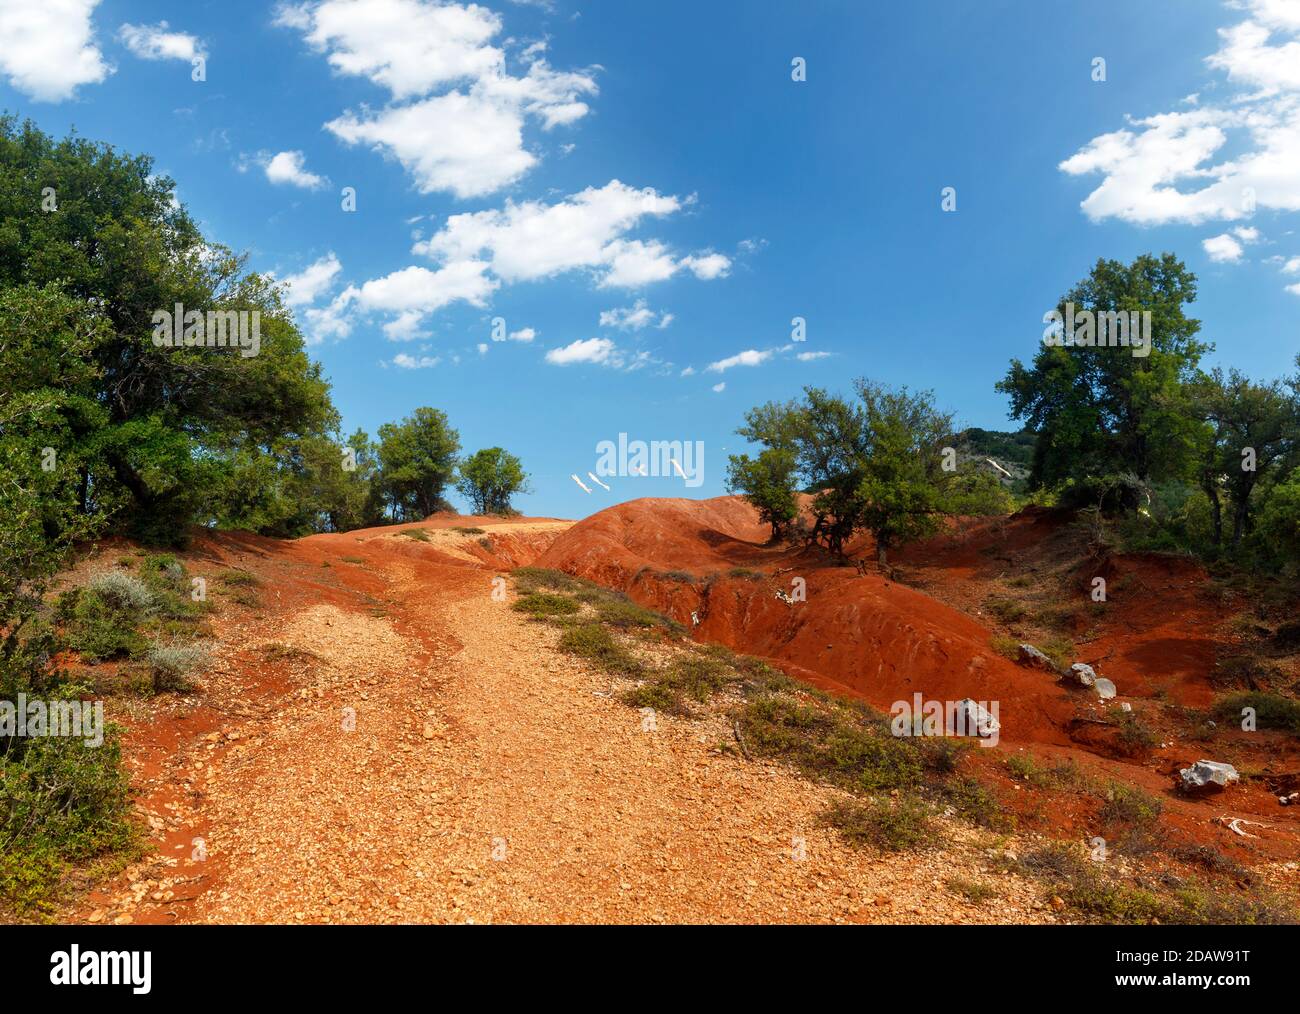 Red clay terrain at Kokkinopilos area, a rare geological phenomenon where a valley is entirely made of red clay soil, near Preveza, in Epirus, Greece, Stock Photo